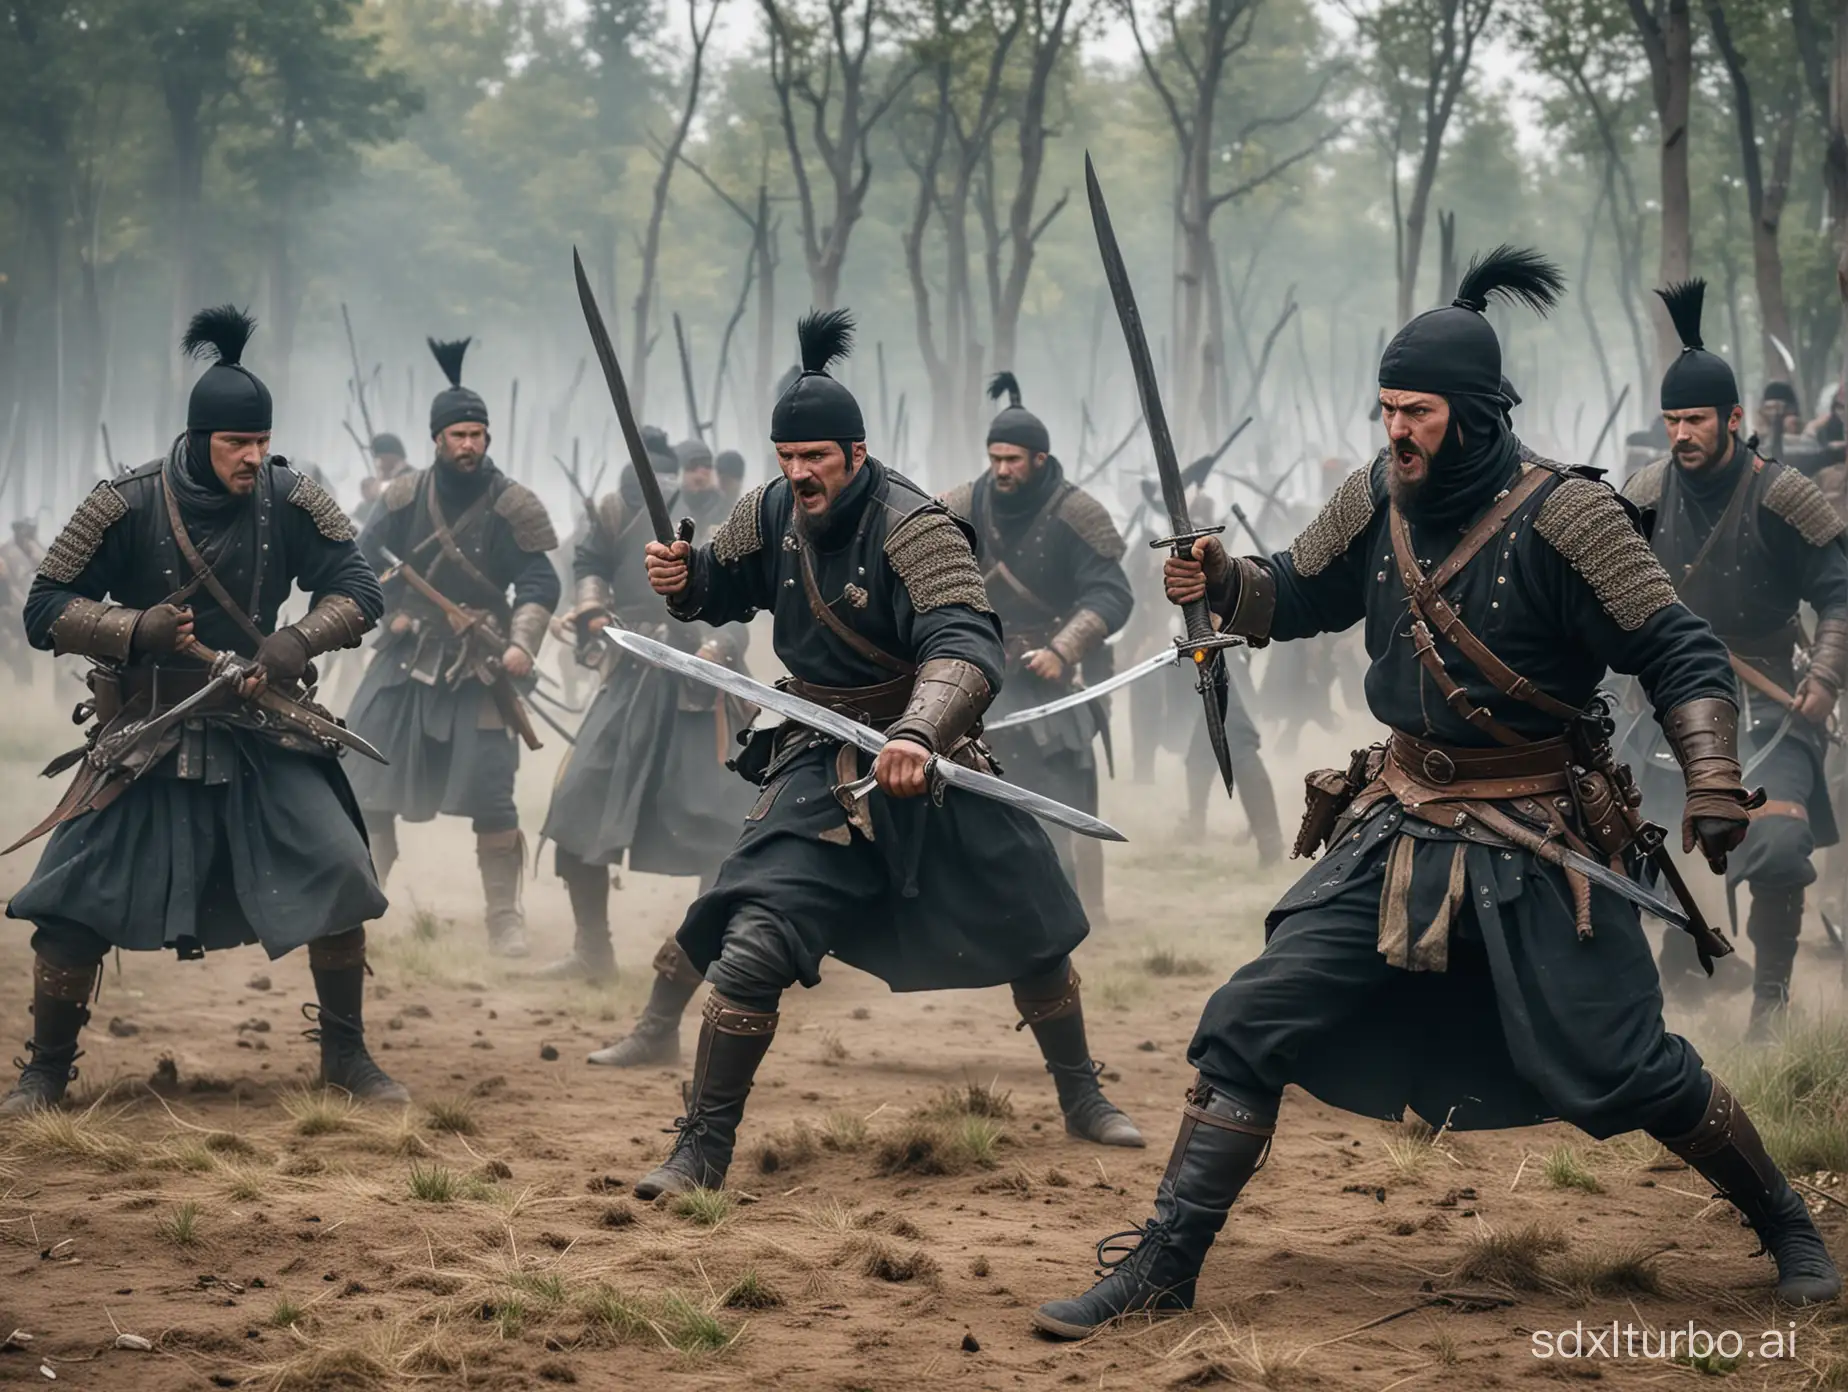 Lightly armed medieval infantrymen fight on swords with skinheaded bandits with a tuft of black hair on their heads like Ukrainian Cossacks.